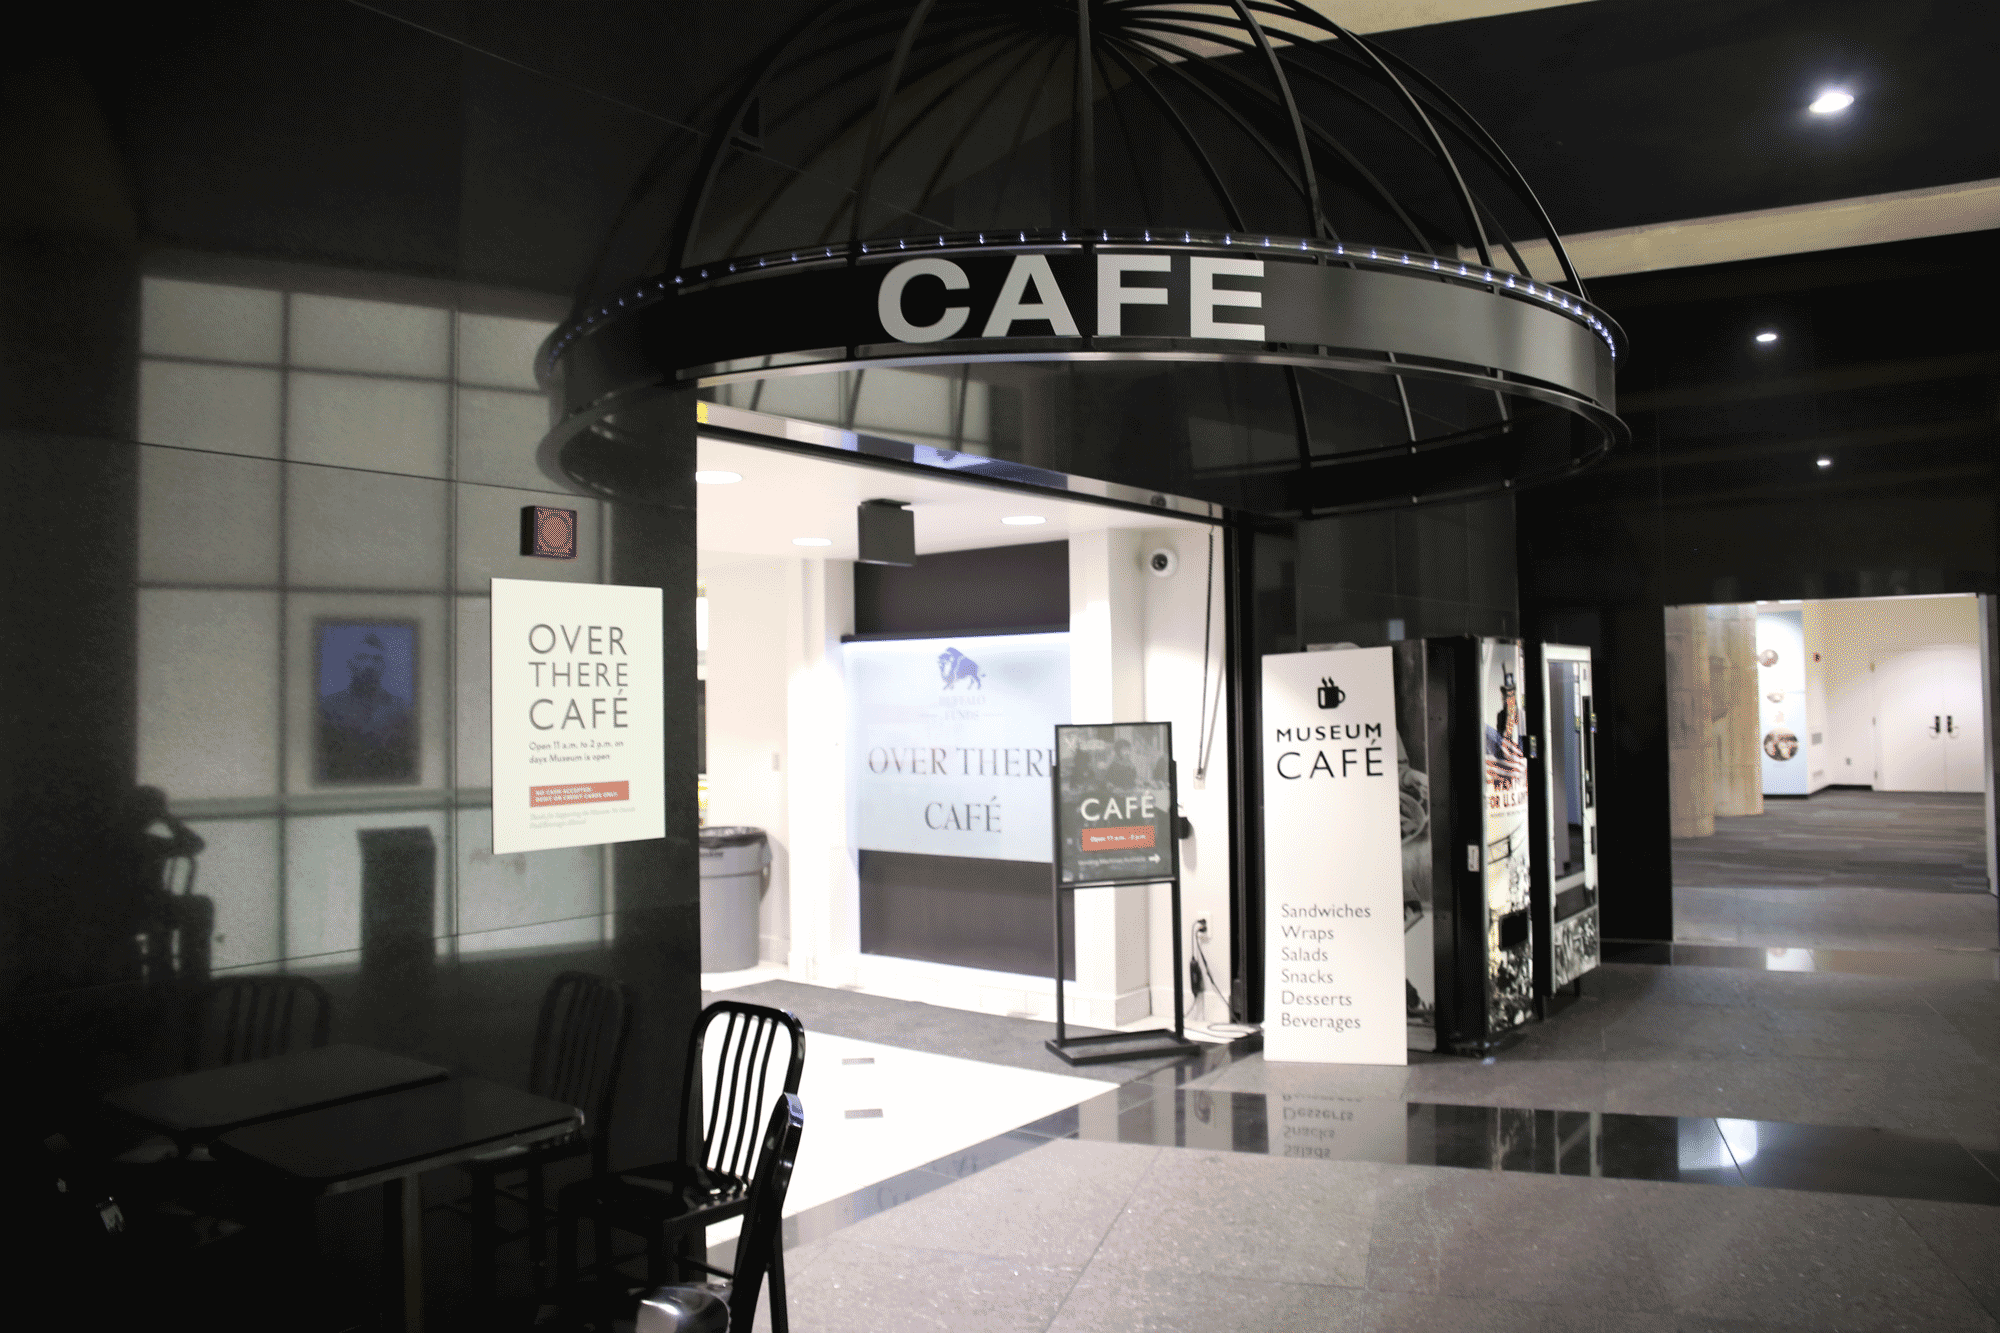 Entrance to the Over There Cafe